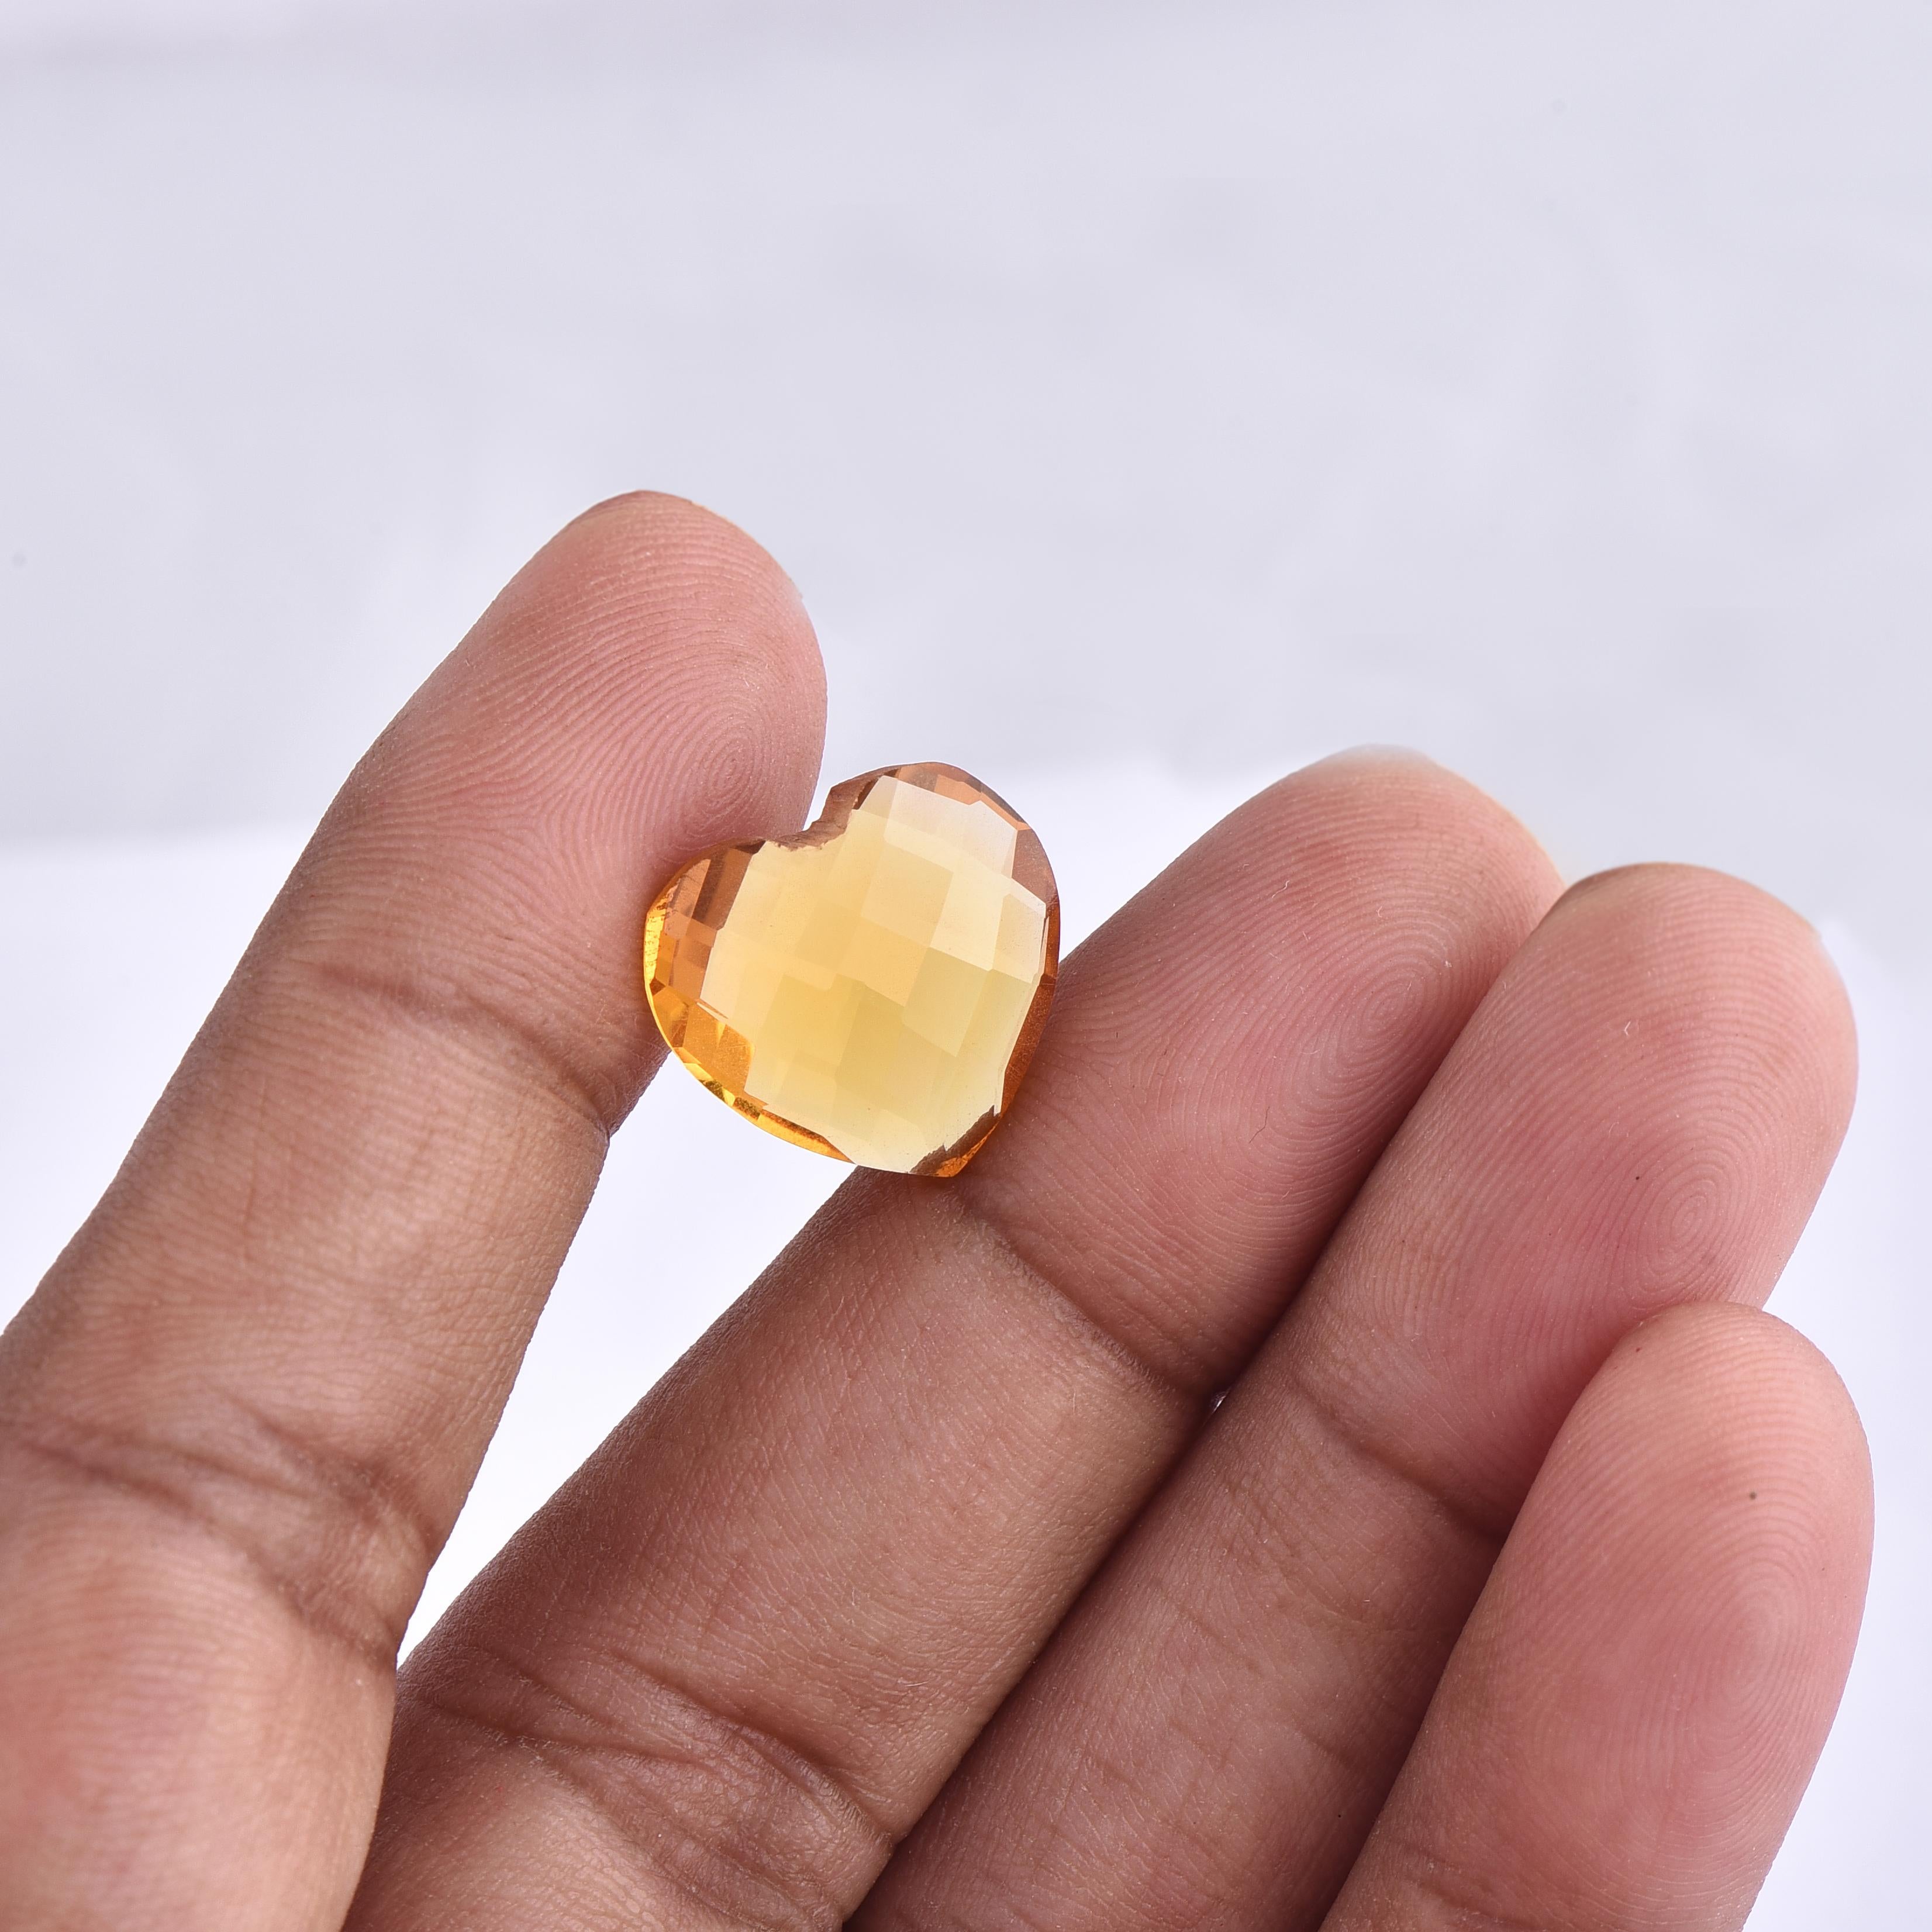 Heart Cut TJD Loose Yellow Natural Citrine 7.29 Ct Heart Shape Gemstone for Any Jewellery